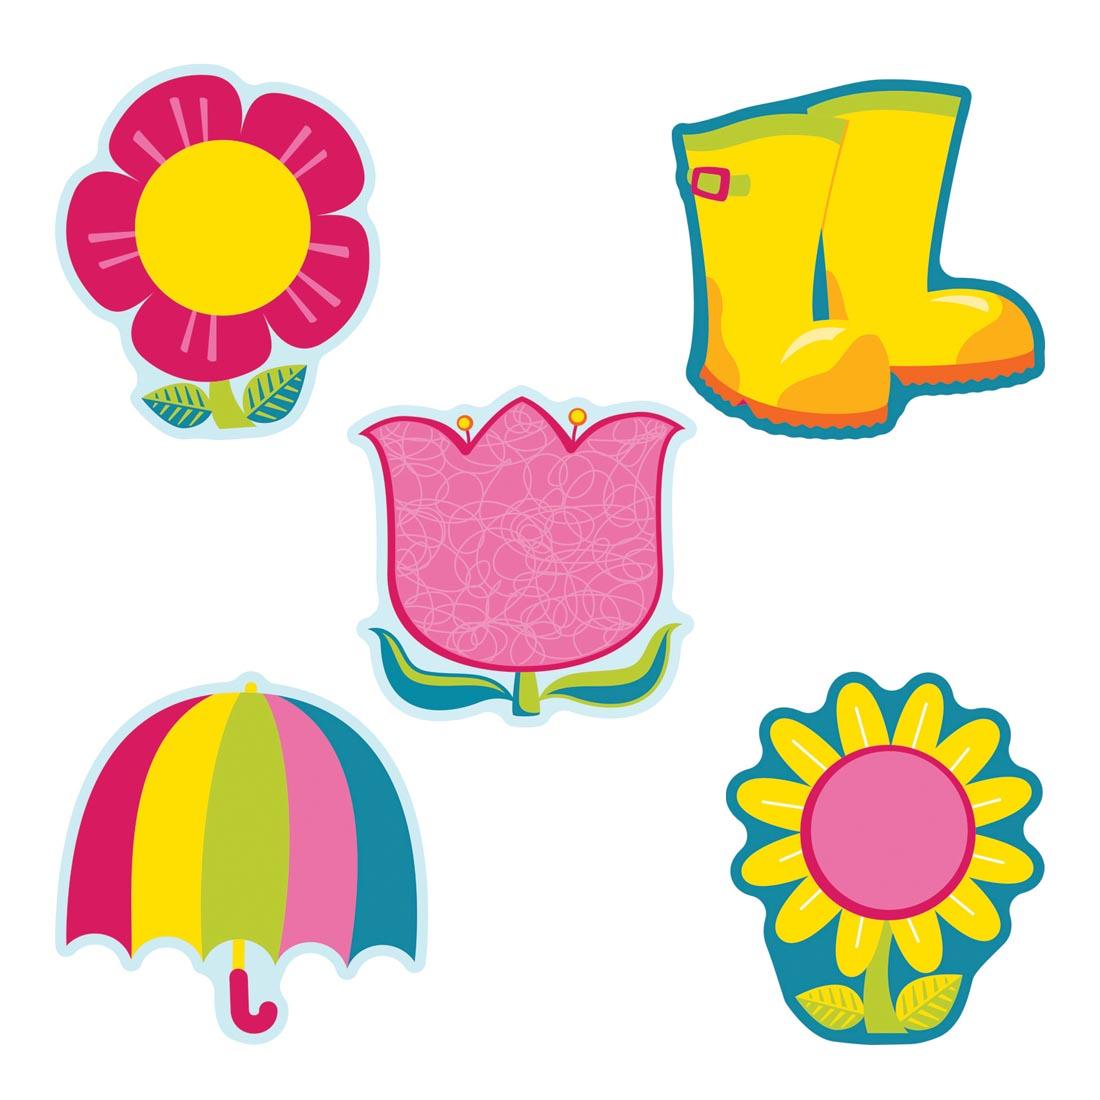 Rain Boots, Umbrella and Flowers are part of the Spring Mix Cut-Outs by Carson Dellosa